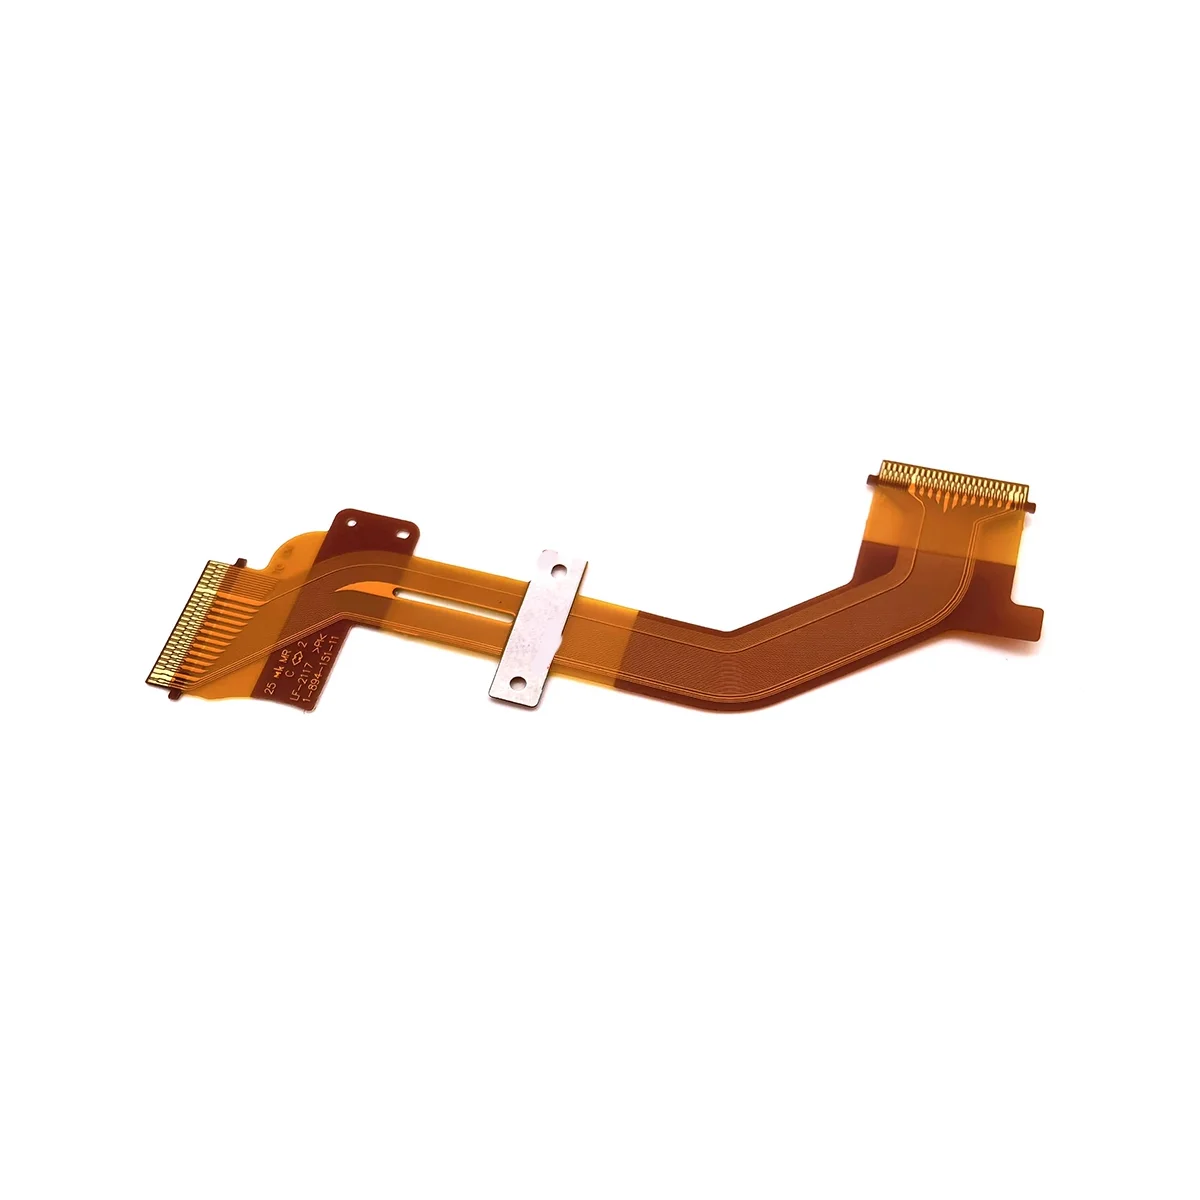 

1PCS New CCD COMS Connect Flex Cable for Sony FDR-AX30E FDR-AX30 FDR-AX33 FDR-AXP33 FDR-AXP35 AX30 AXP35 Video Parts